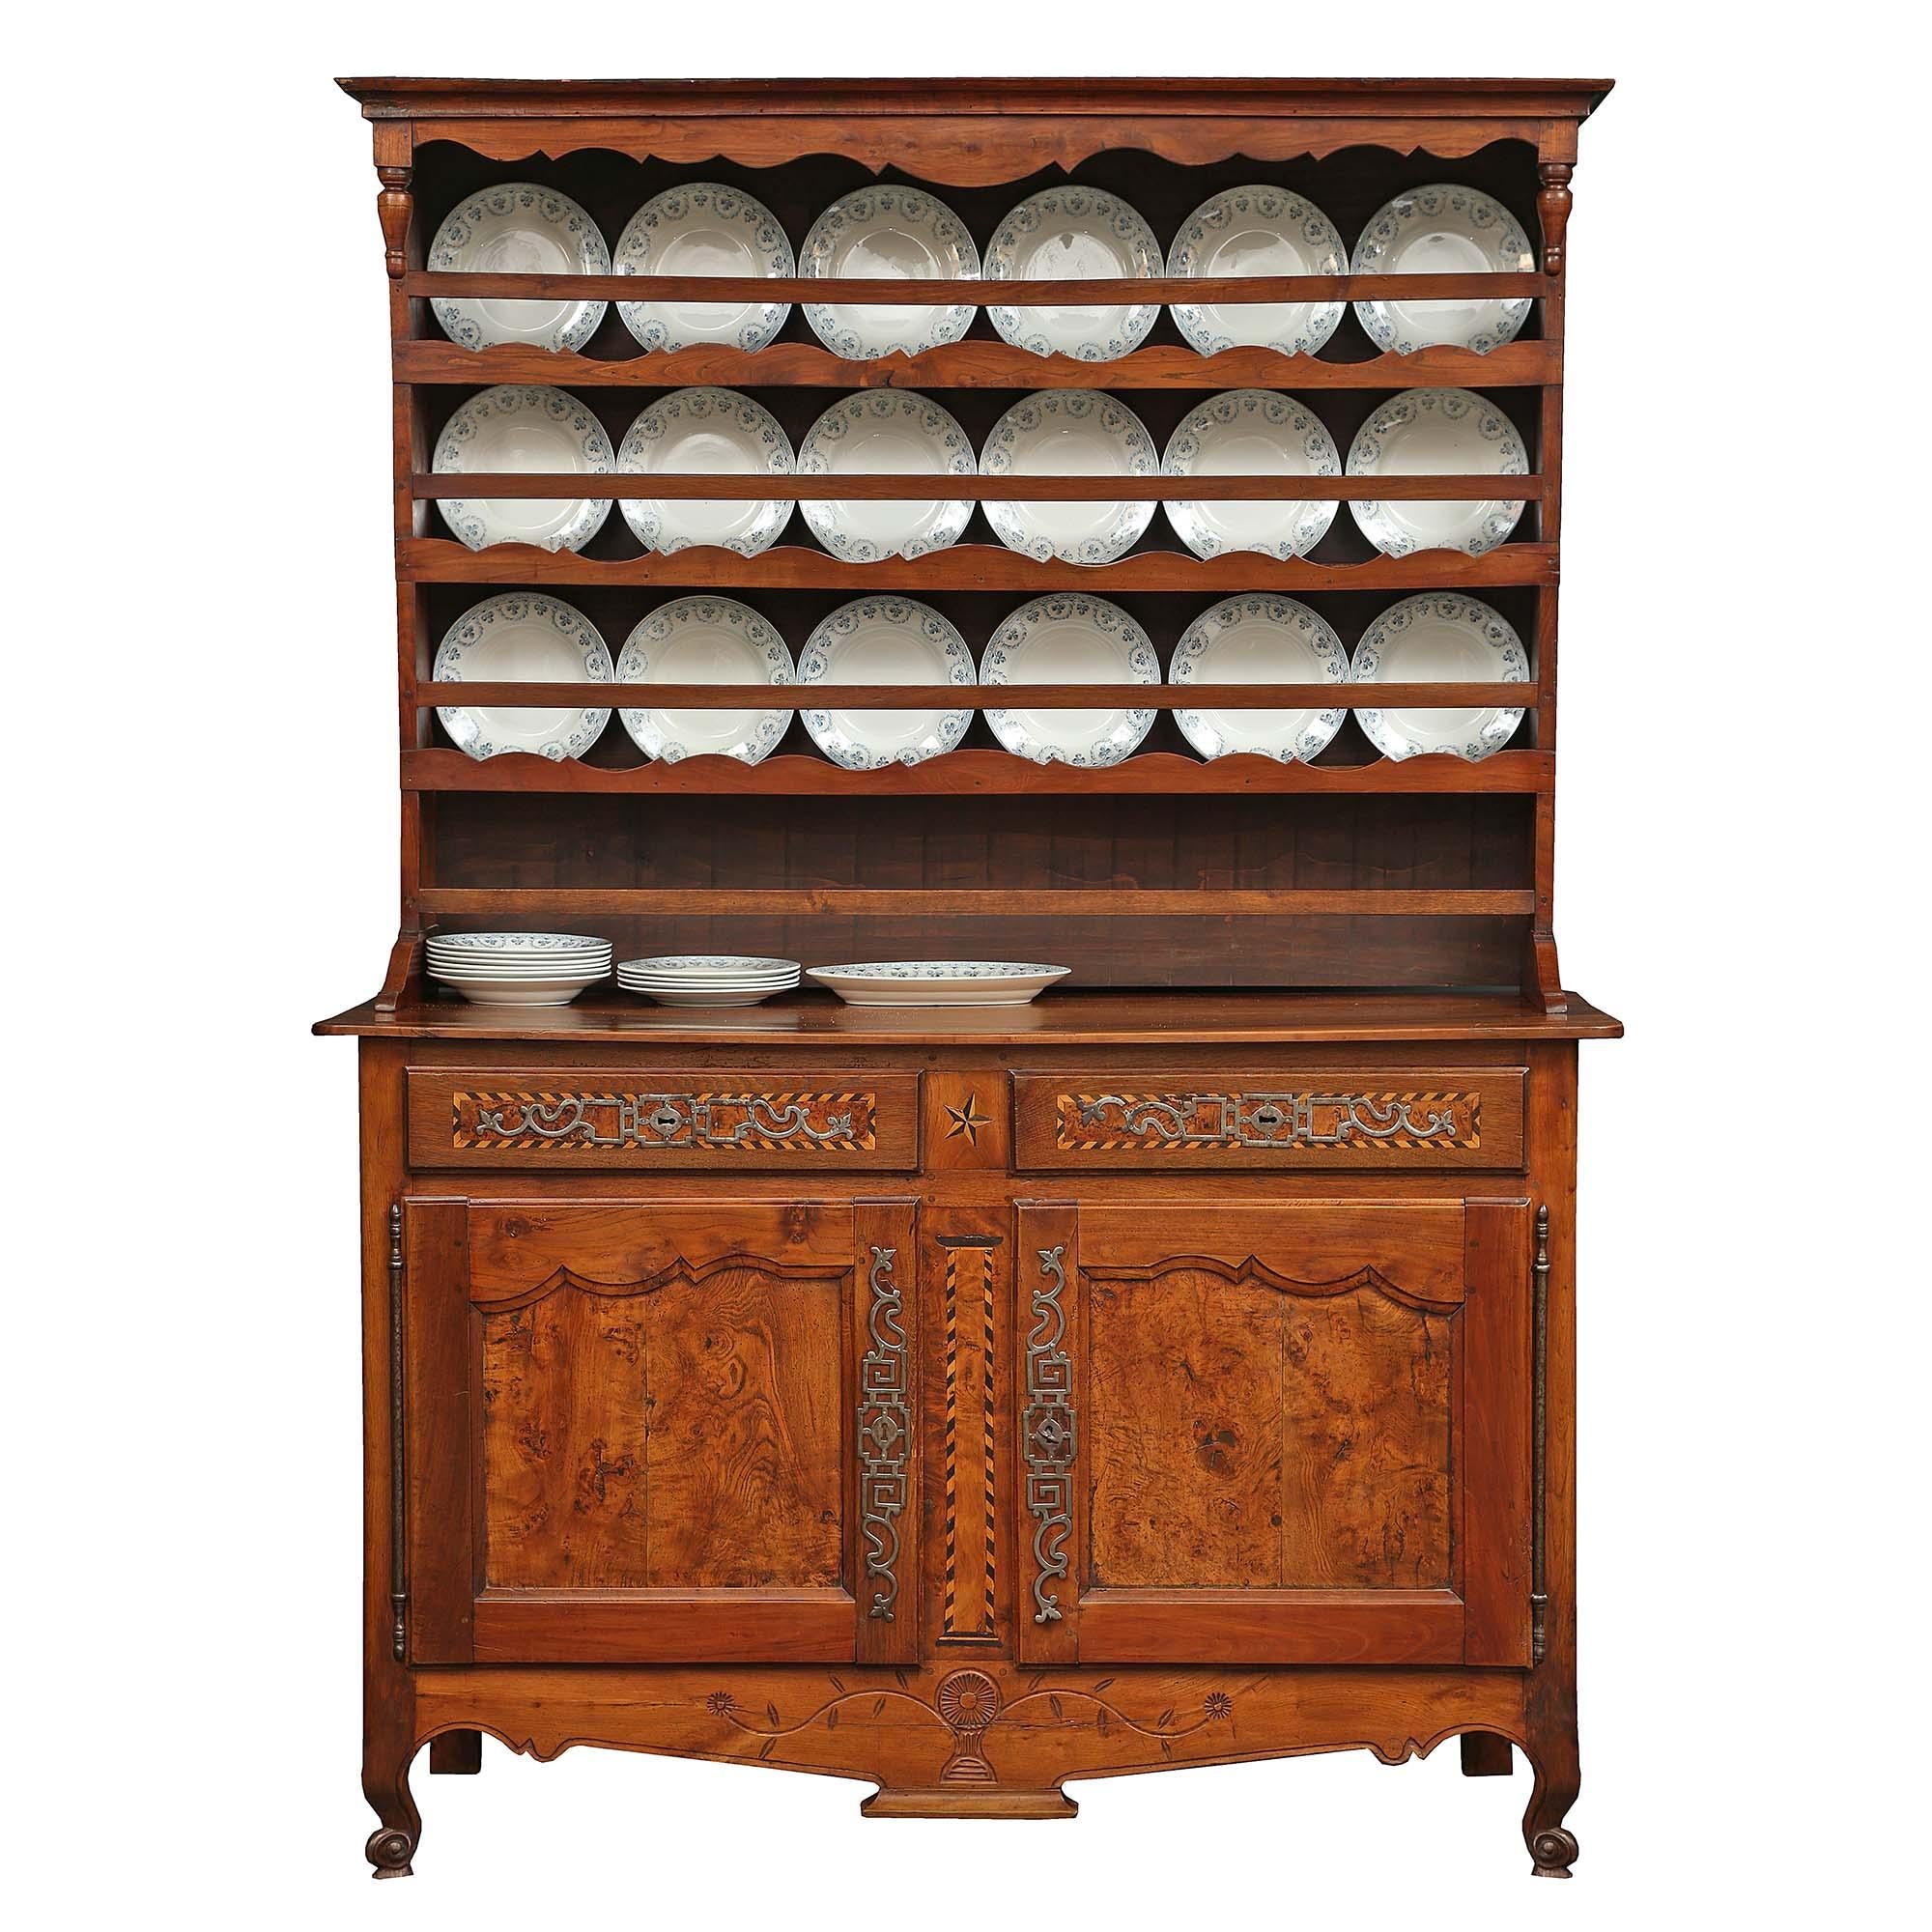 An elegant country French 18th century walnut Vaissellier.The buffet is raised on richly carved cabriole legs, and a finely carved apron with a design of a central urn with scrolled branches, leaves and flowers. Above are two doors with a moulded